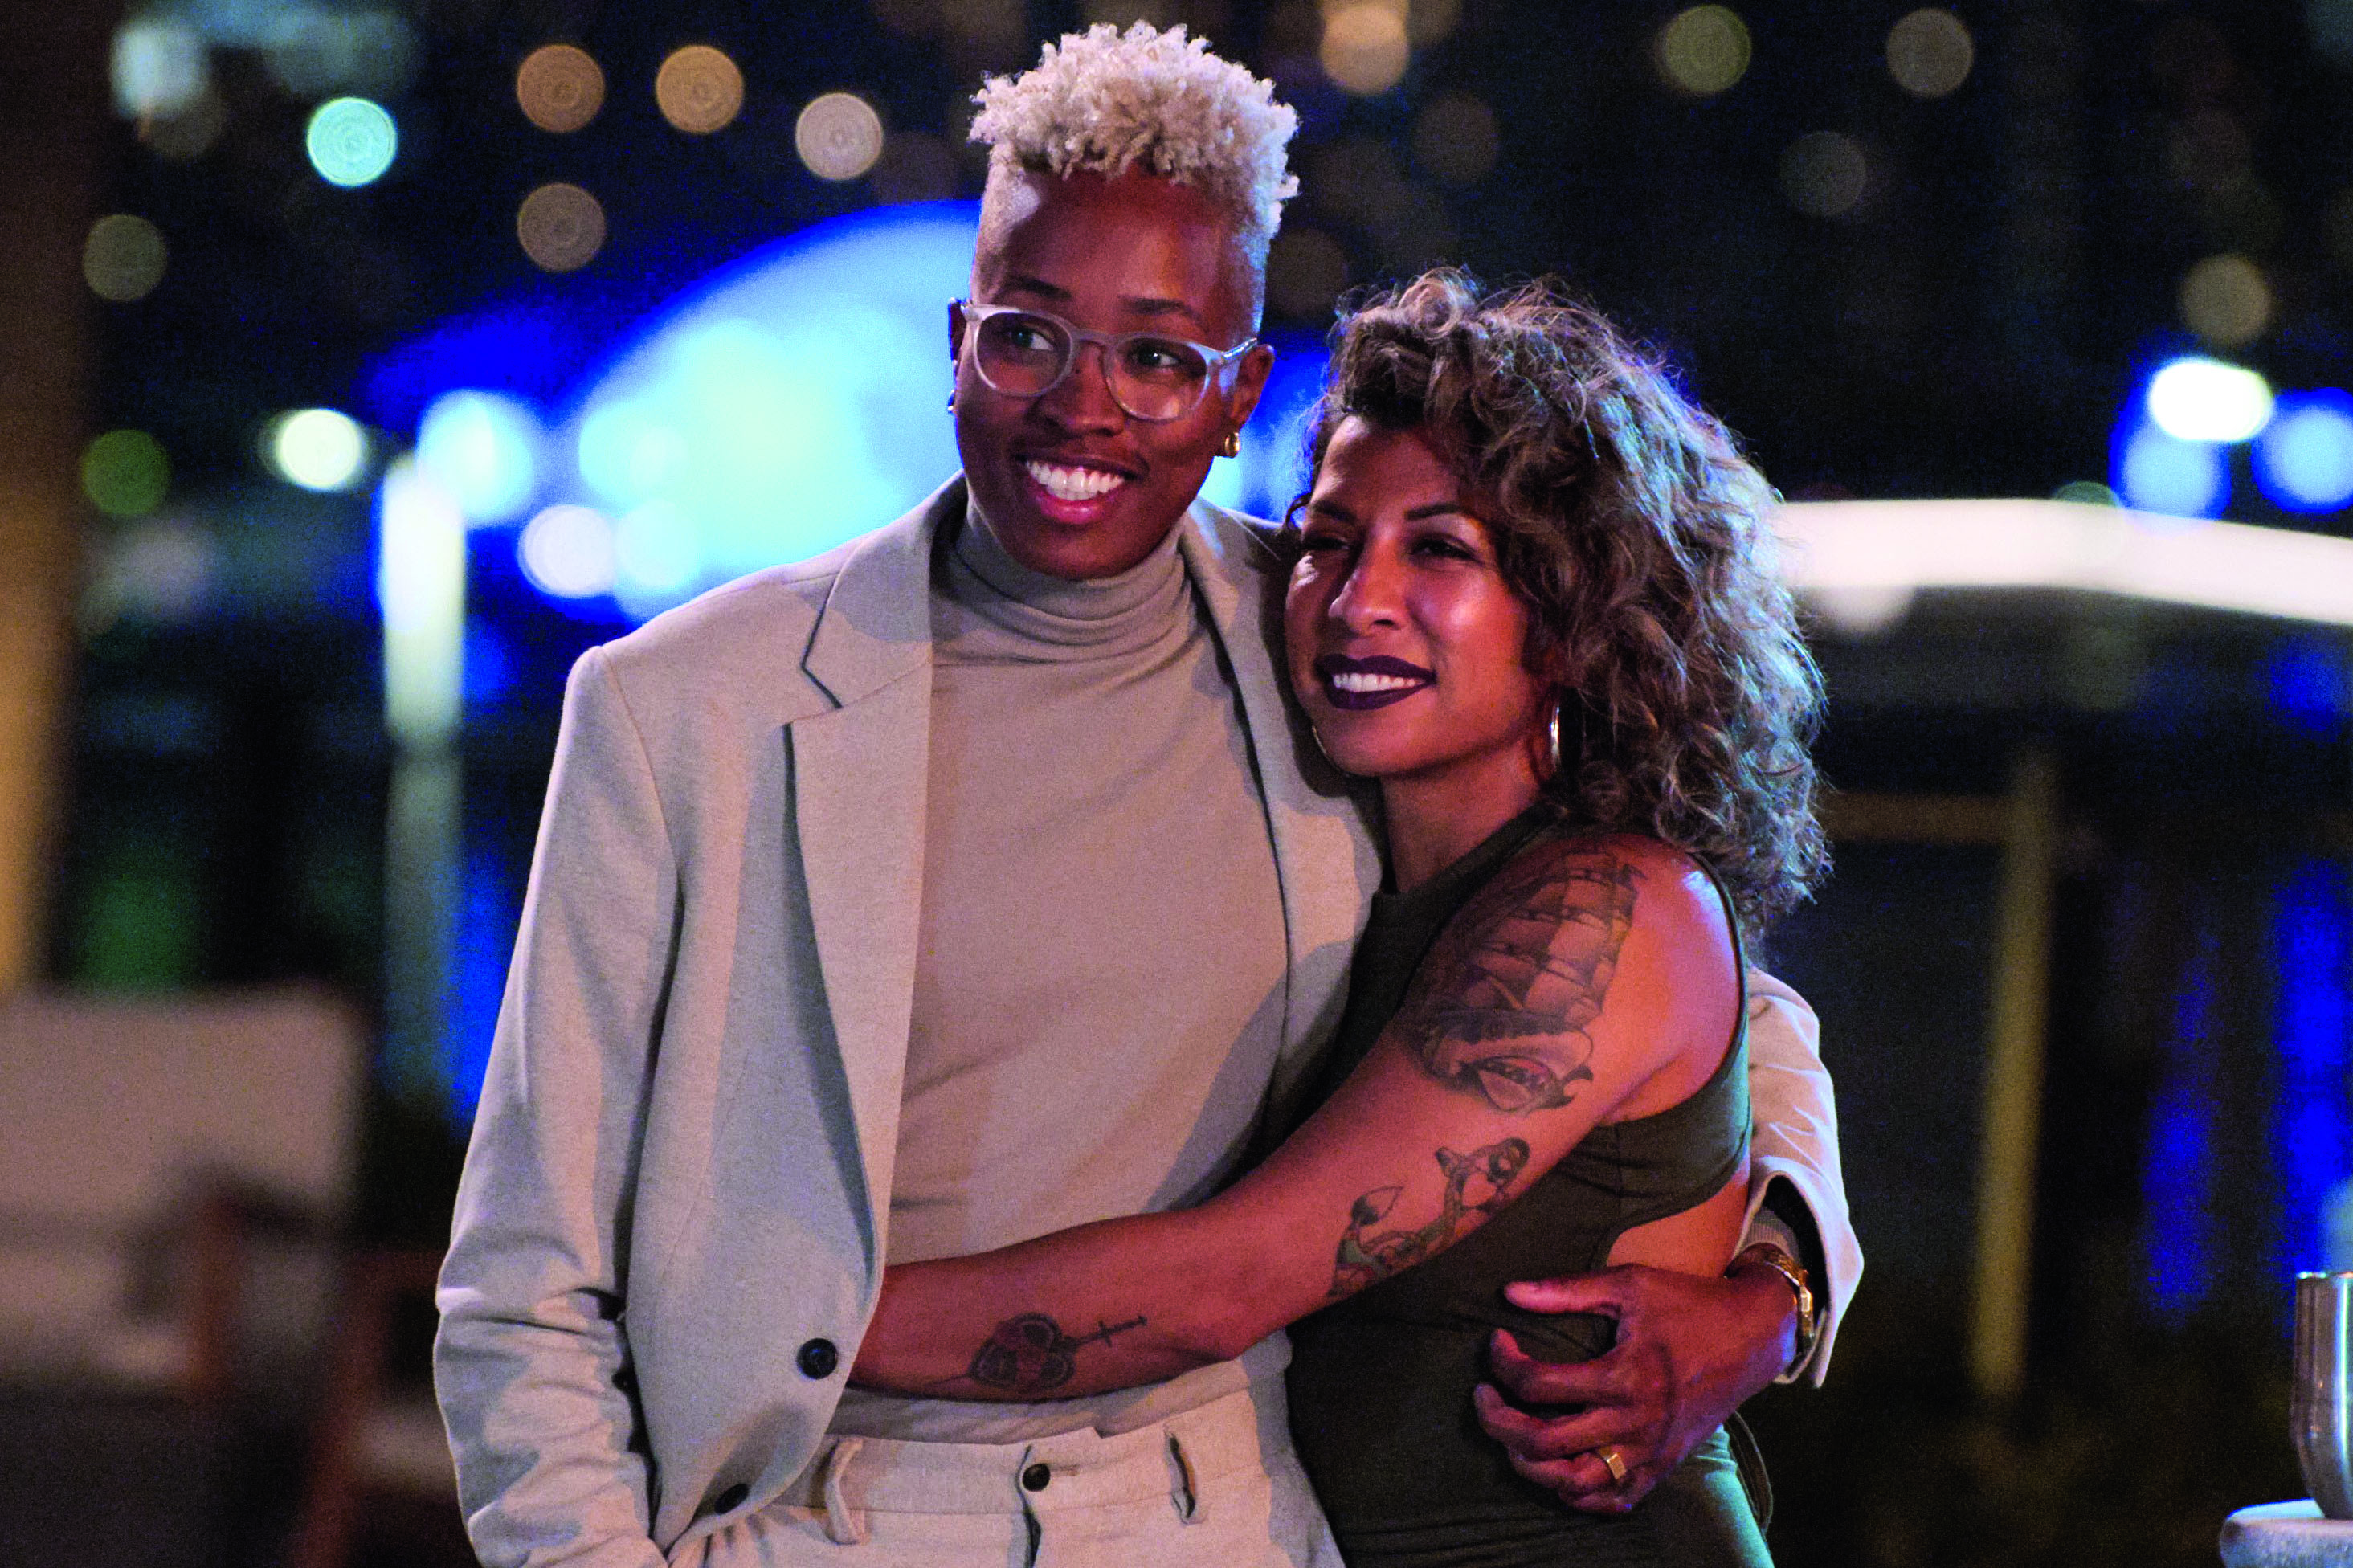 Reviews: Queer dating shows